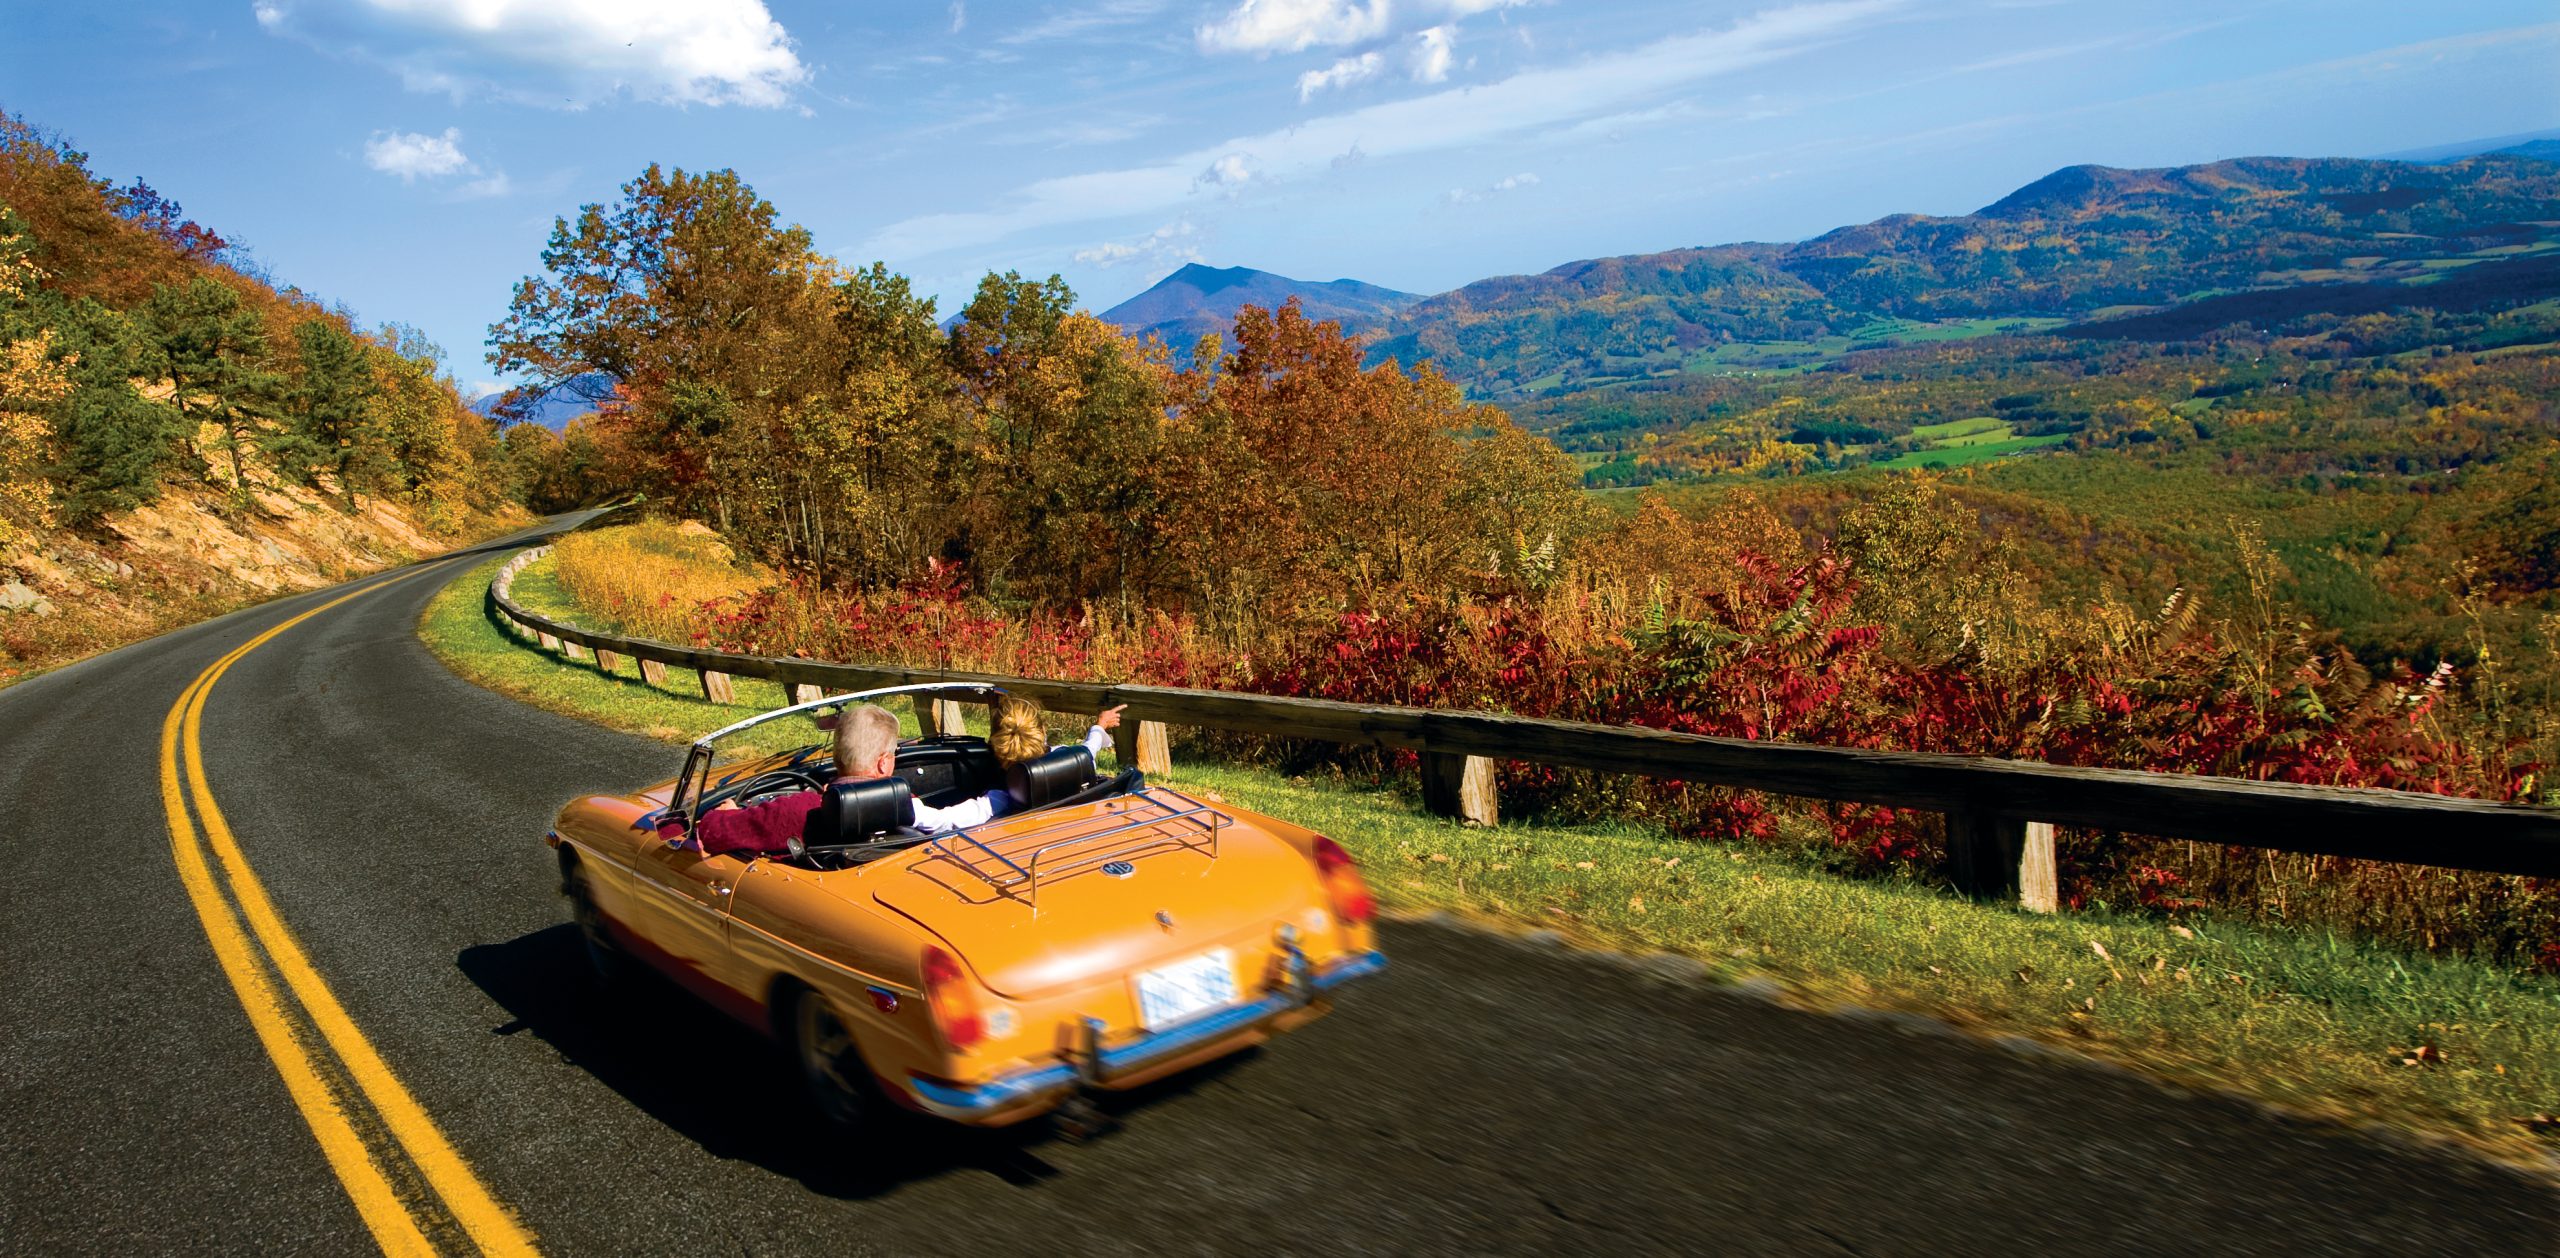 10 Best Scenic Drives in the US for an Epic Road Trip